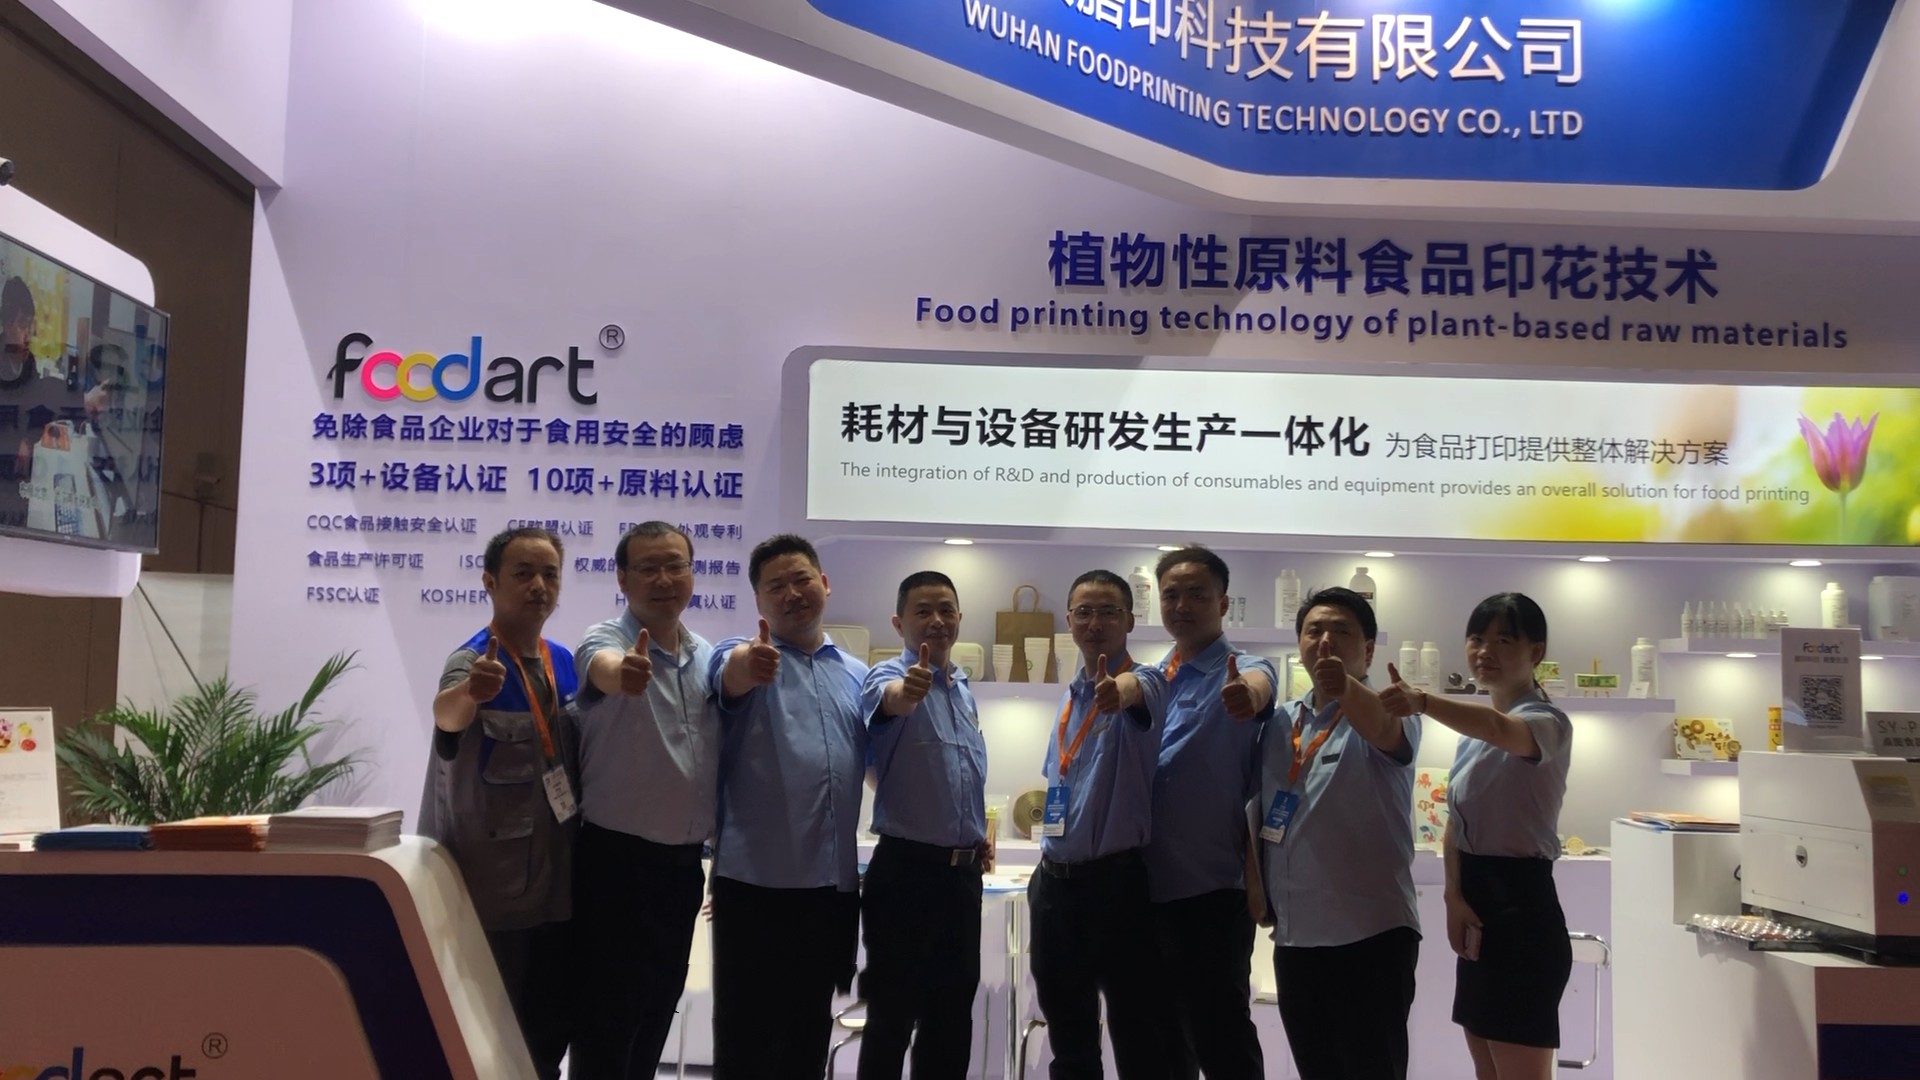 Exhibition review | closing, food printing technology will never stop, look forward to meet again with you